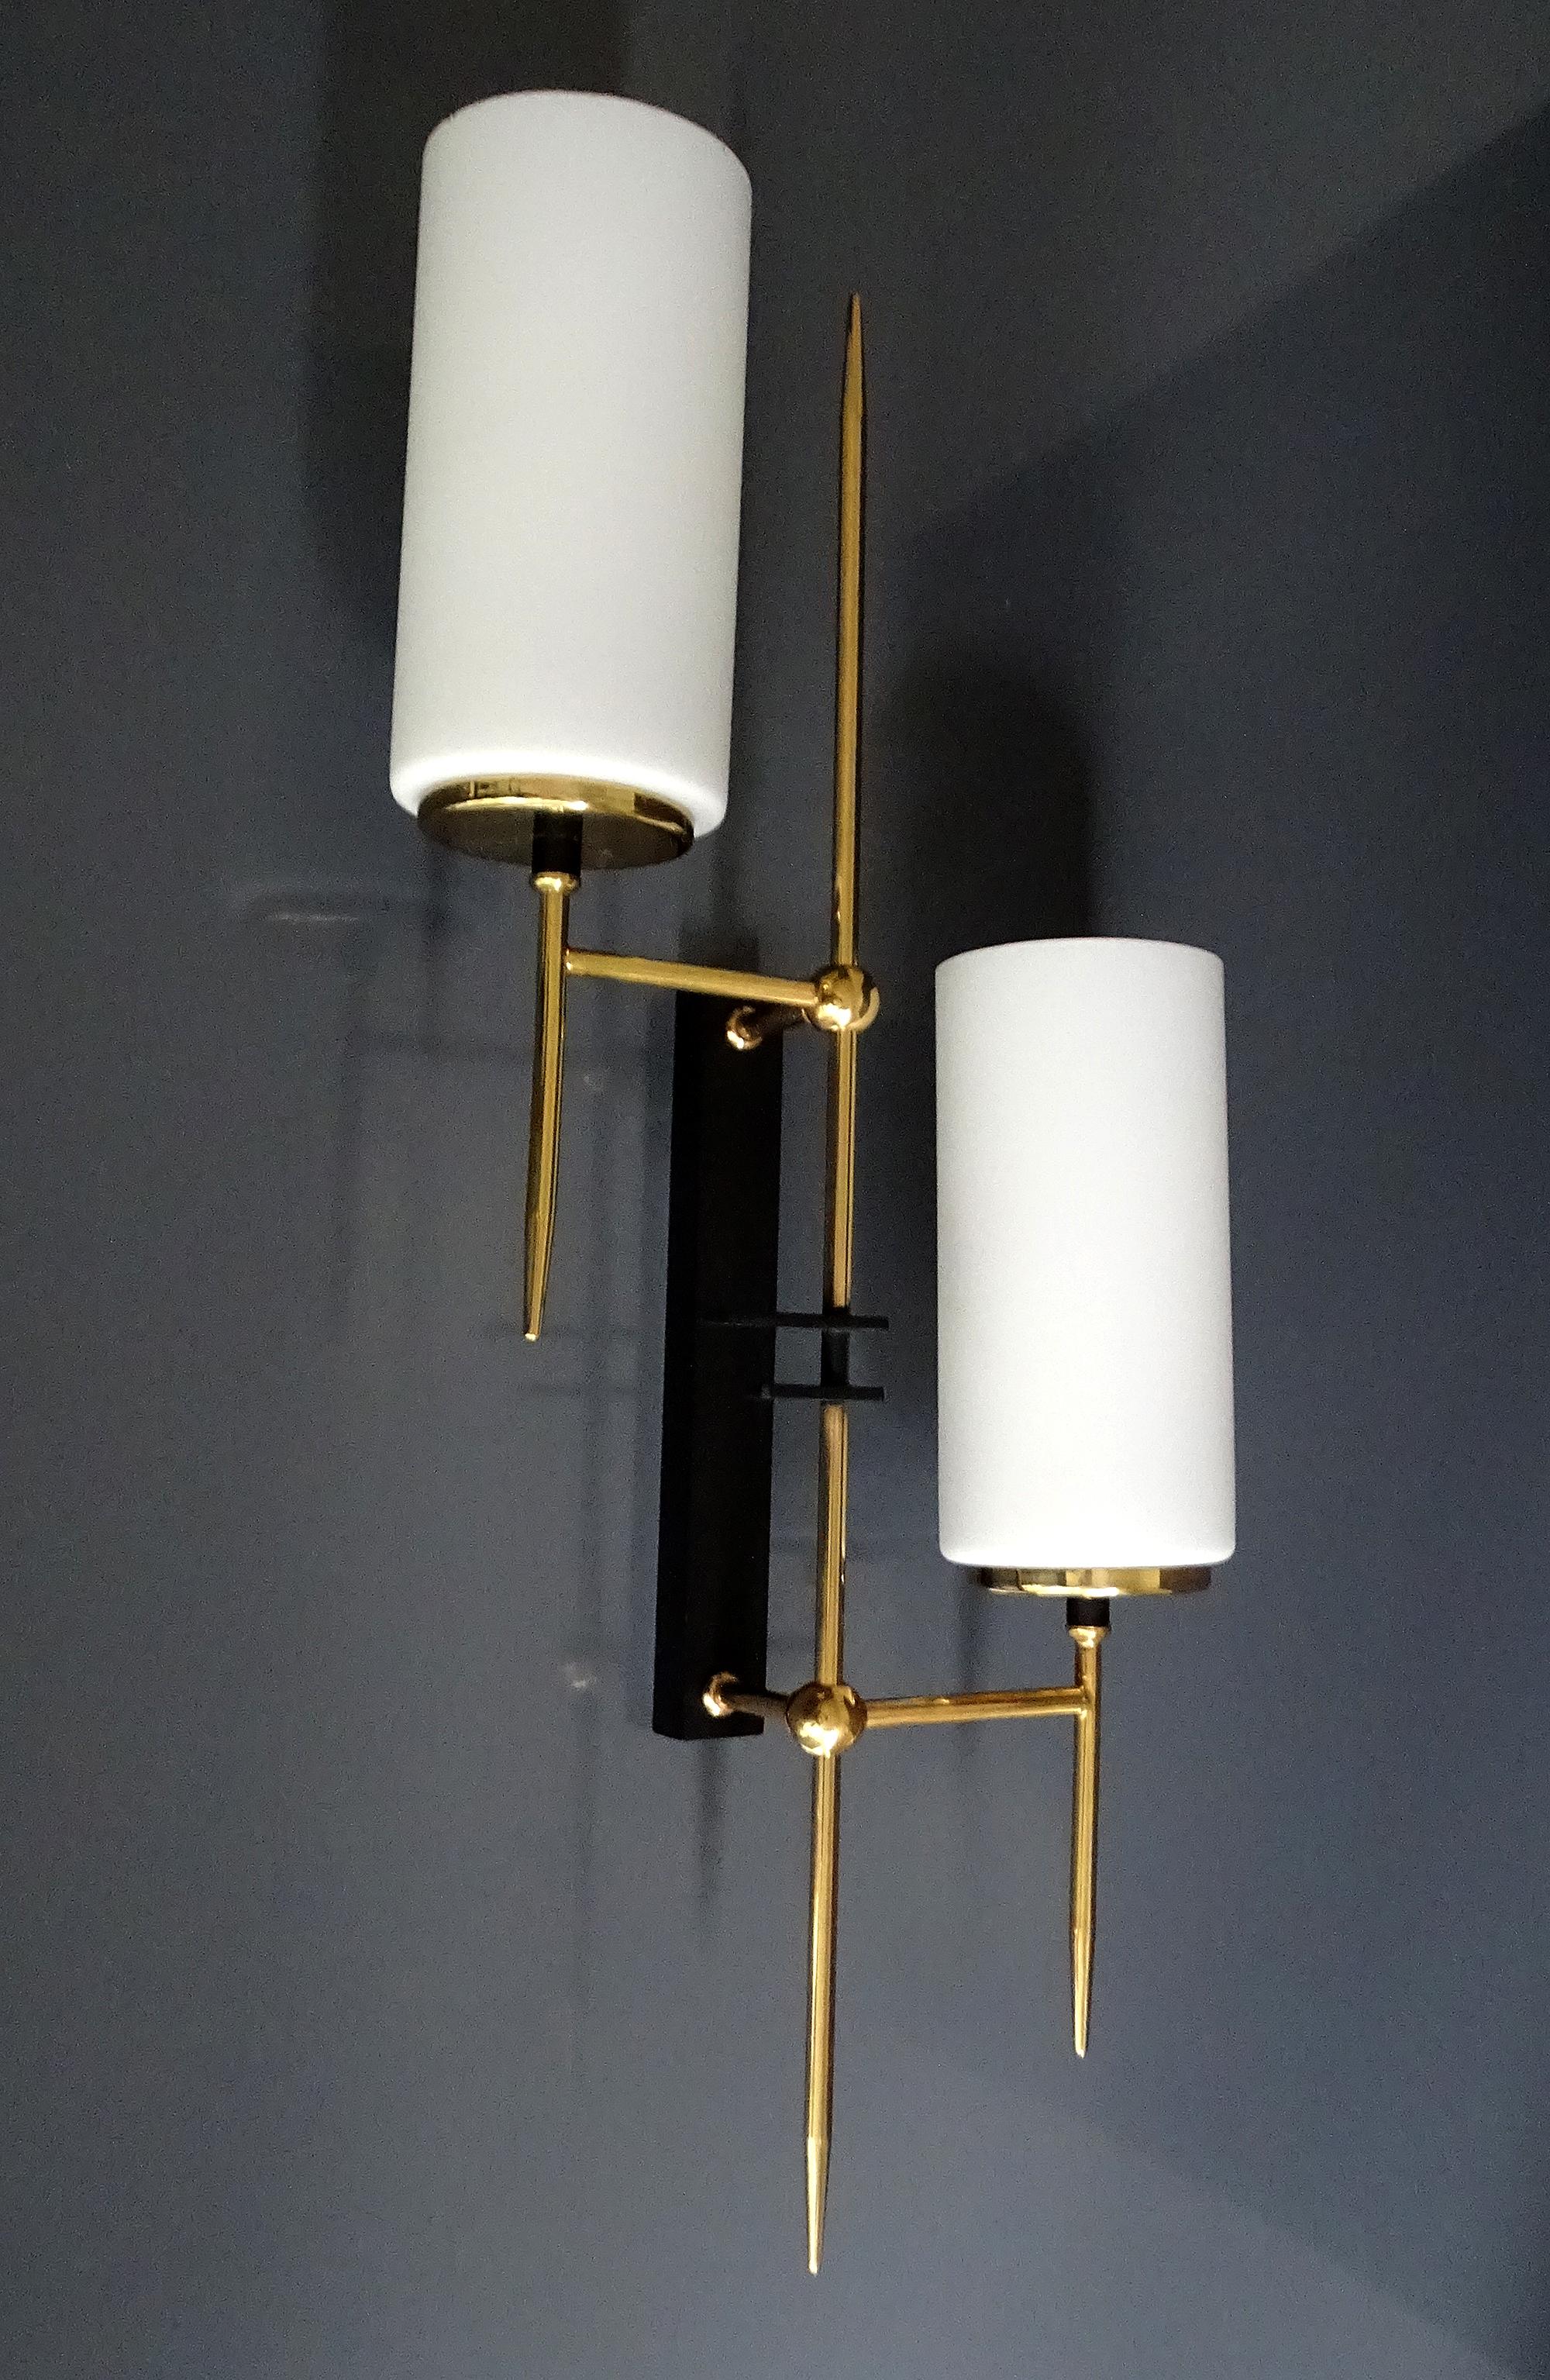 Exceptional  Pair of Large Brass Glass Sconces, France, 1960s, Stilnovo Style For Sale 3